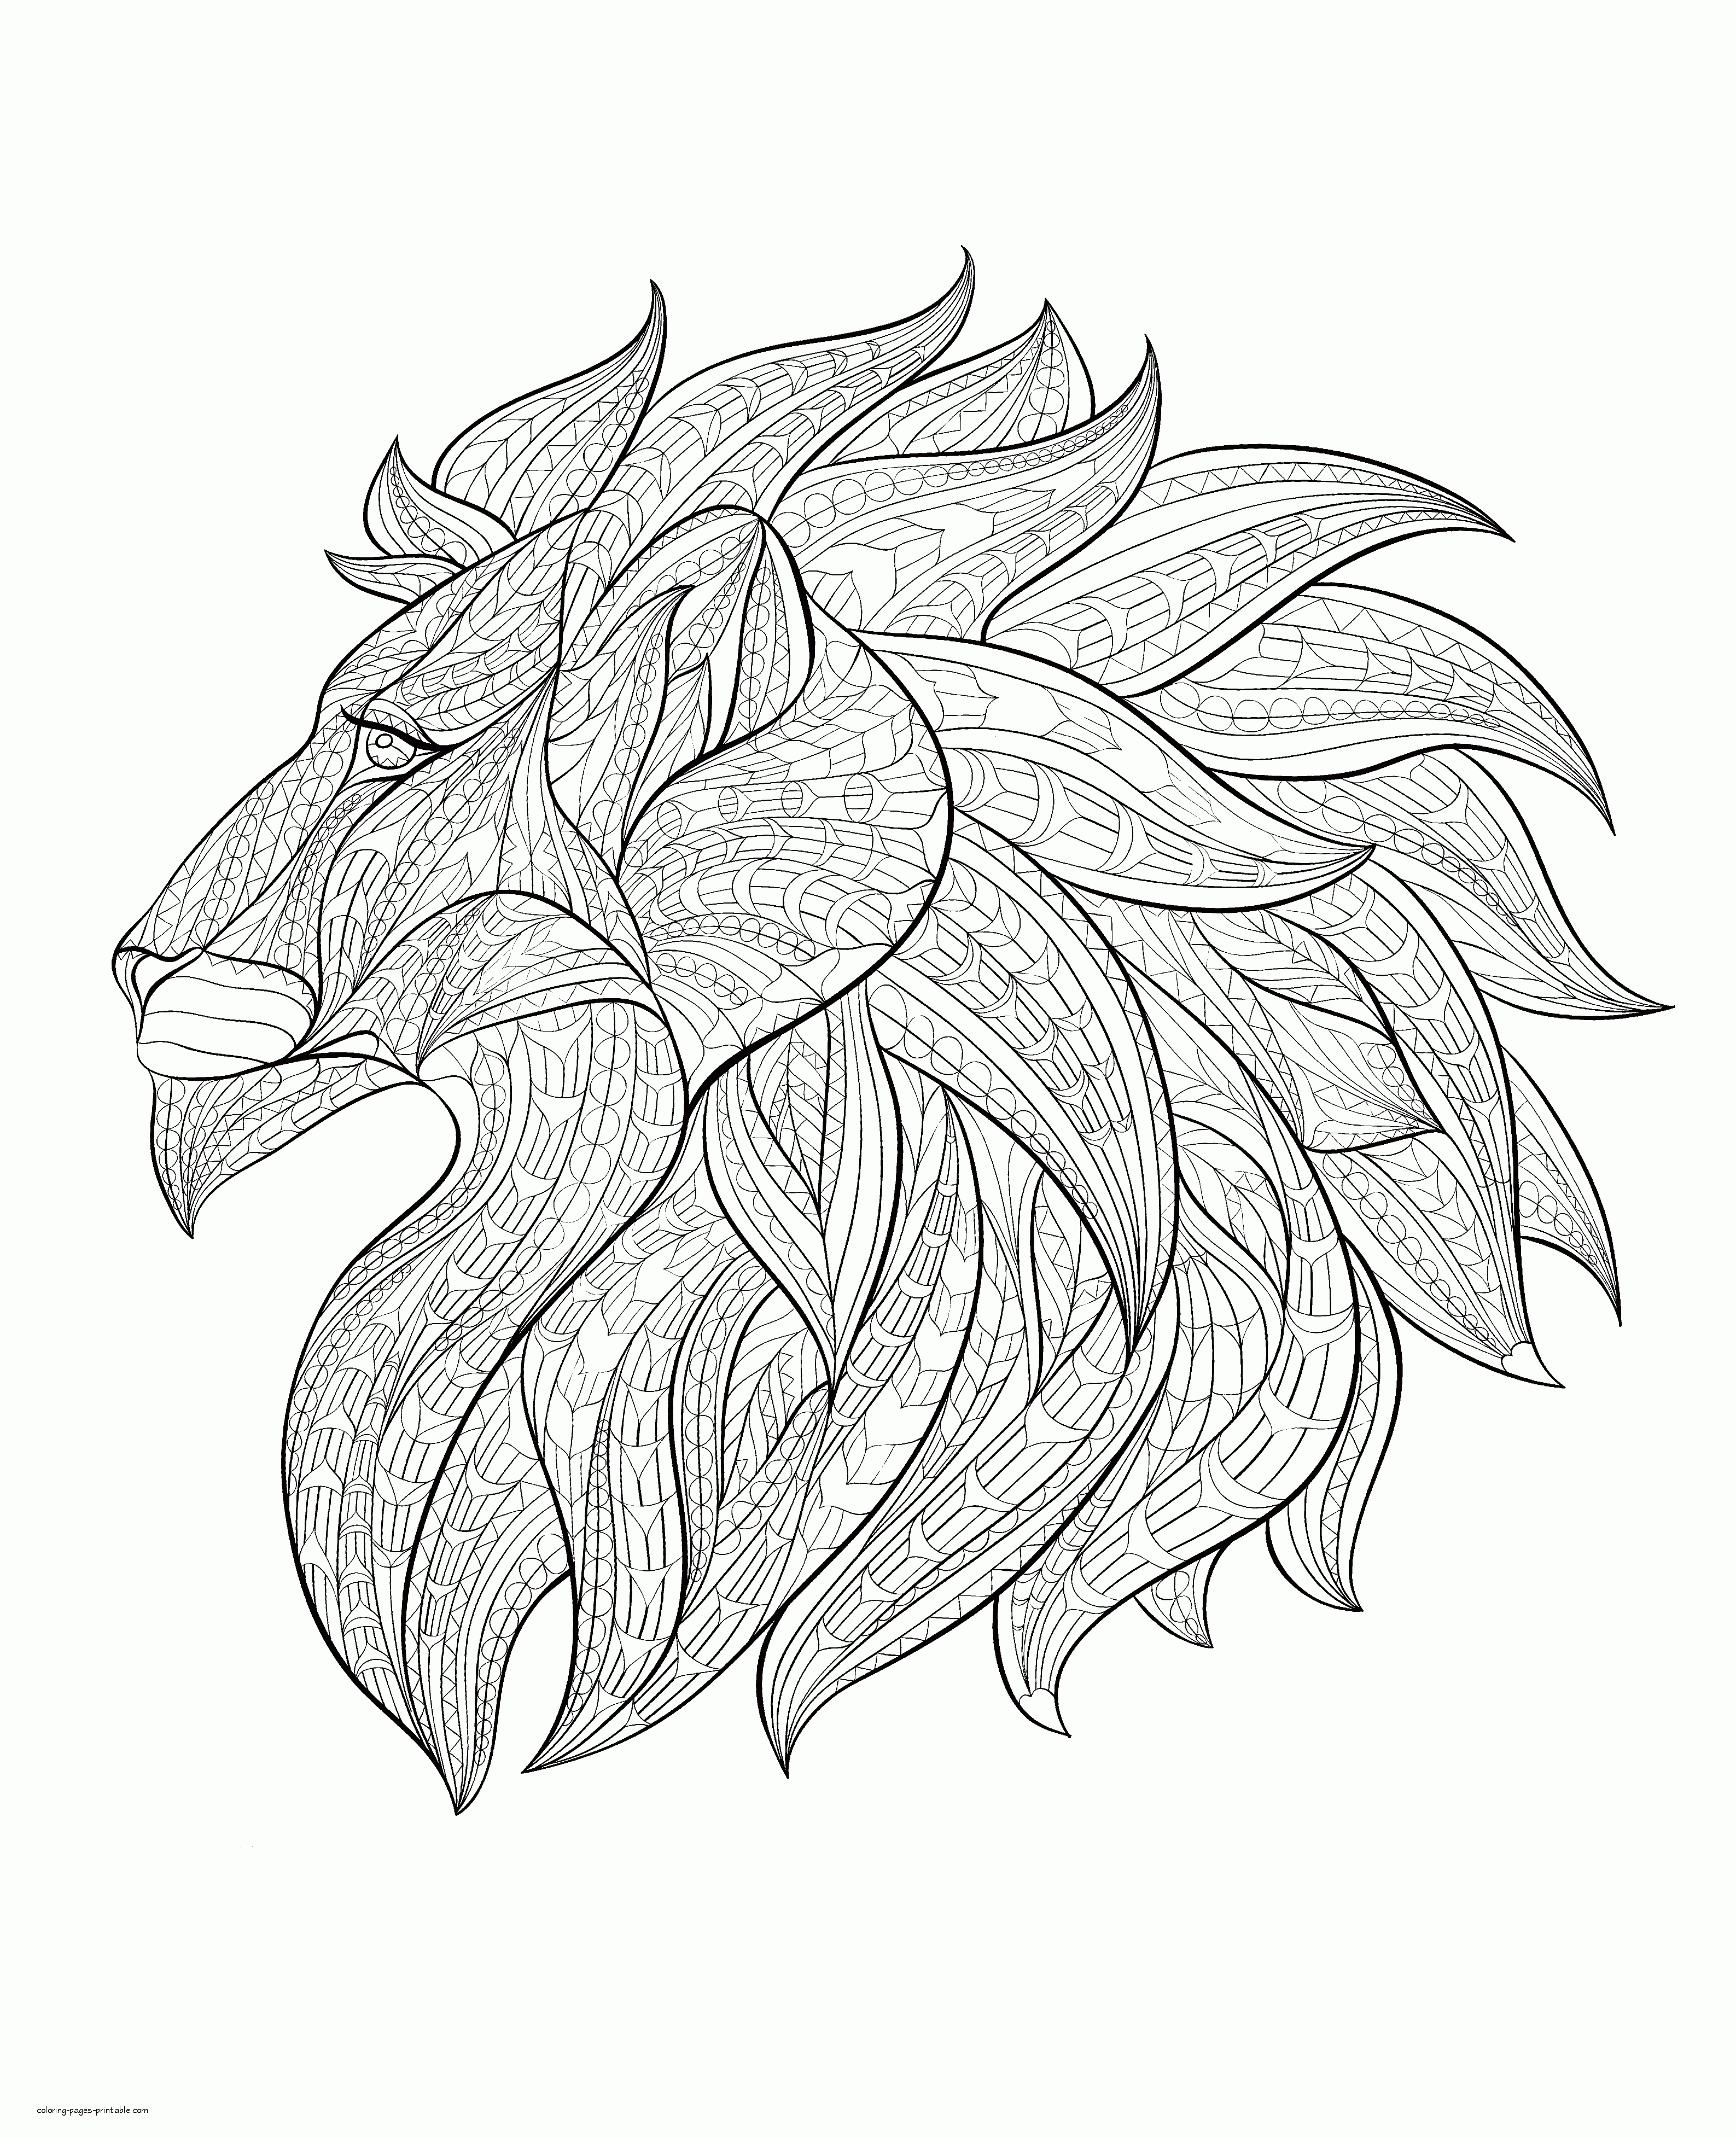 Lion Coloring Pages For Adults printable || COLORING-PAGES-PRINTABLE.COM